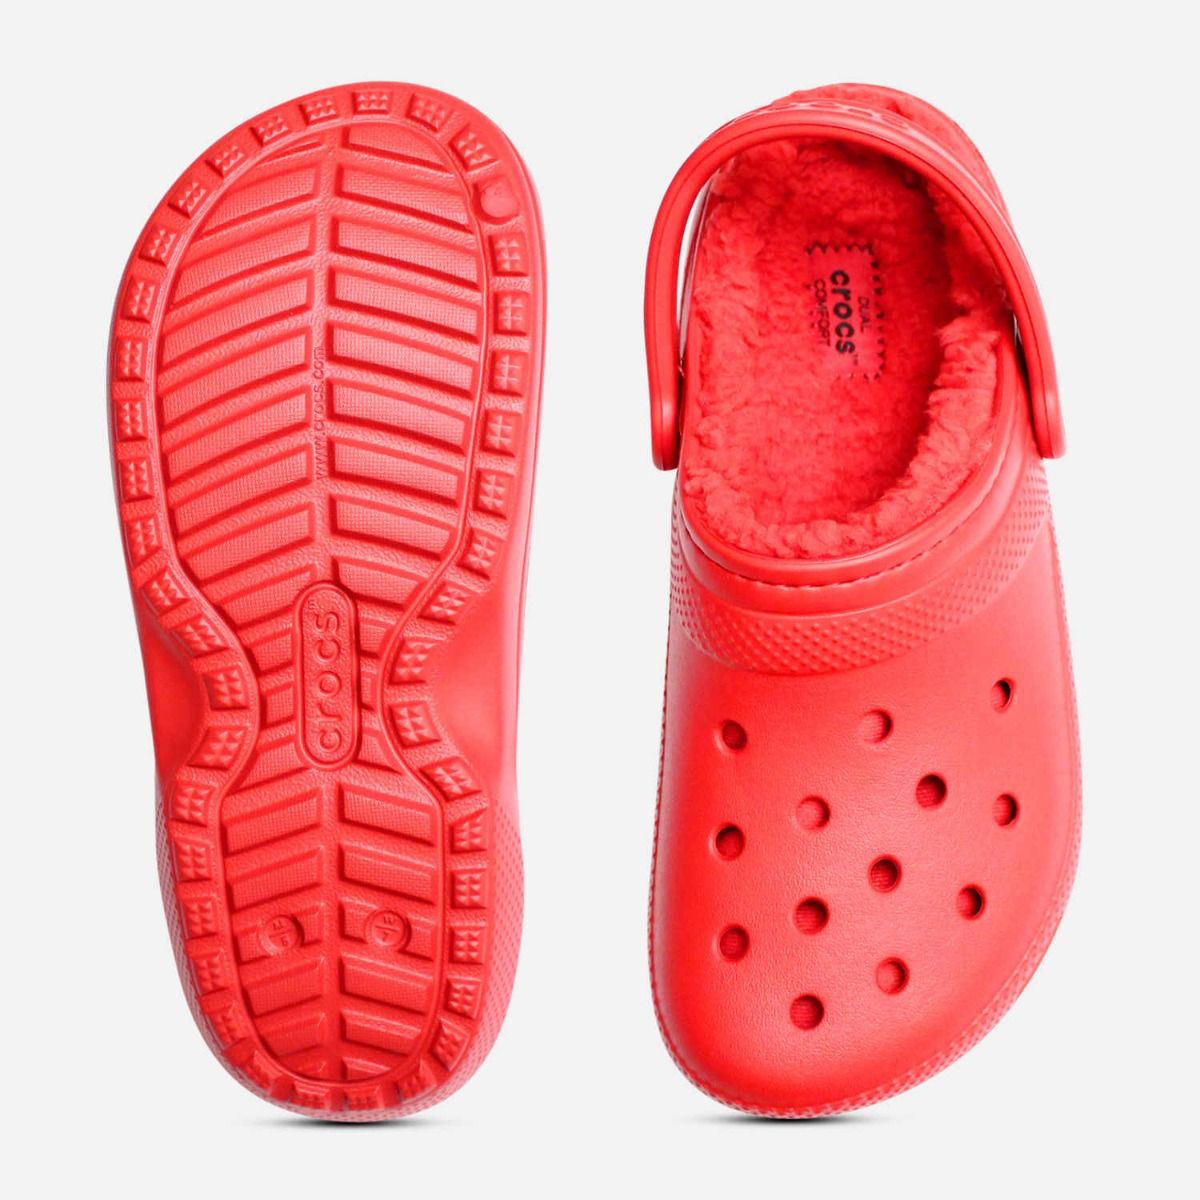 Monopol Skærpe Uskyld Classic Warm Lined Crocs Clog for Women in Red